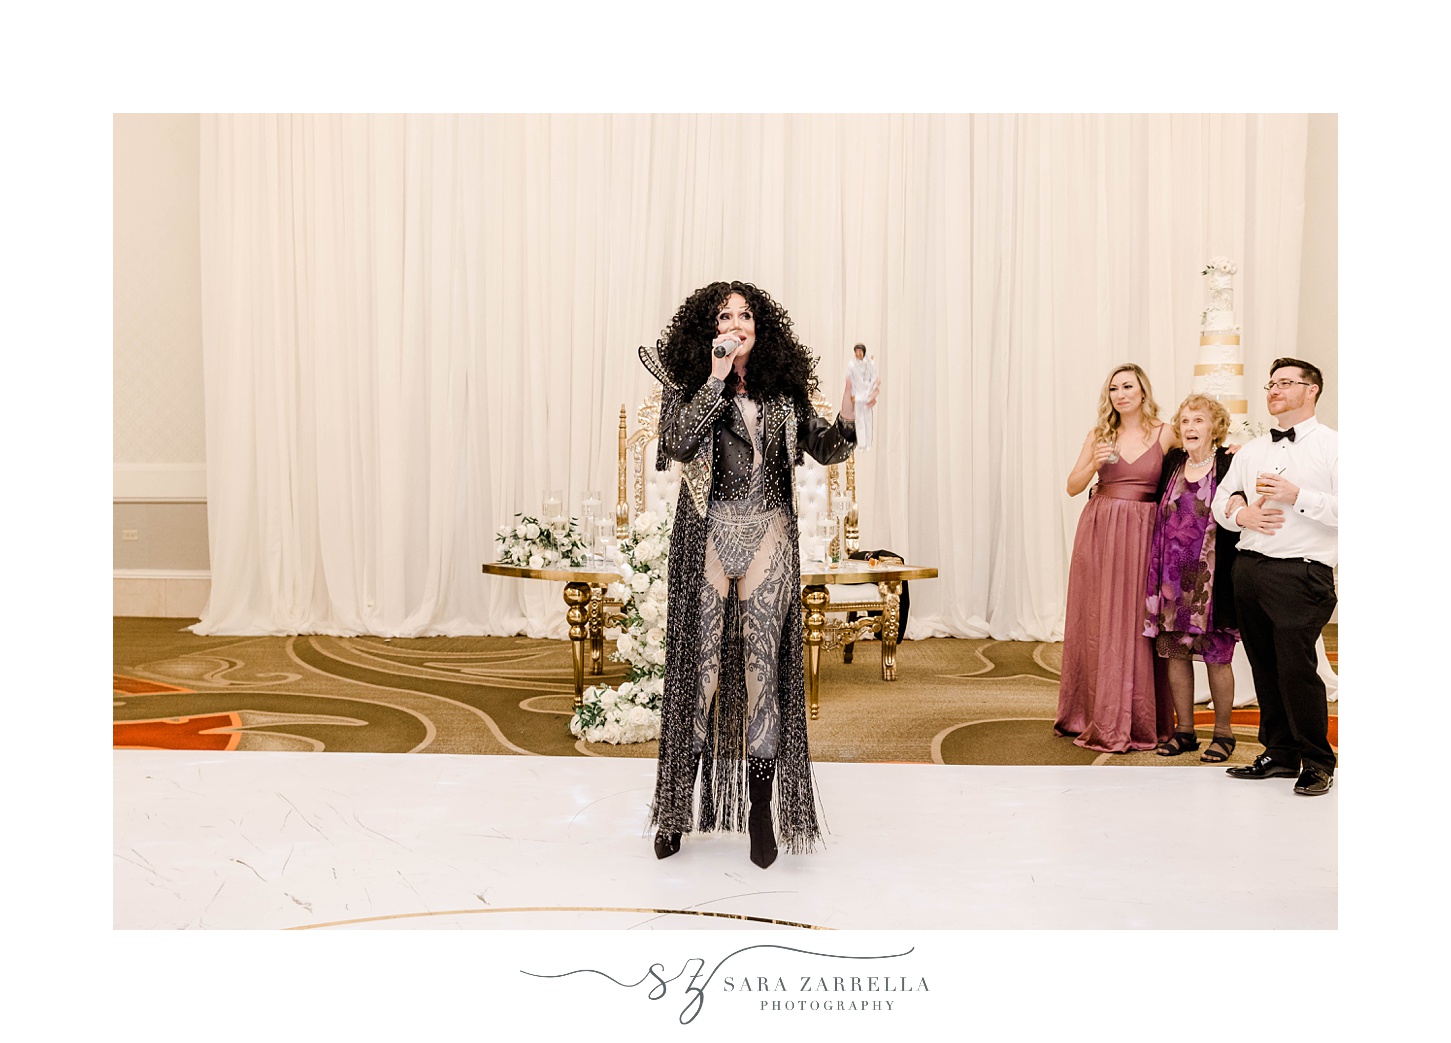 Cher impersonator sings during Omni Providence Hotel wedding reception